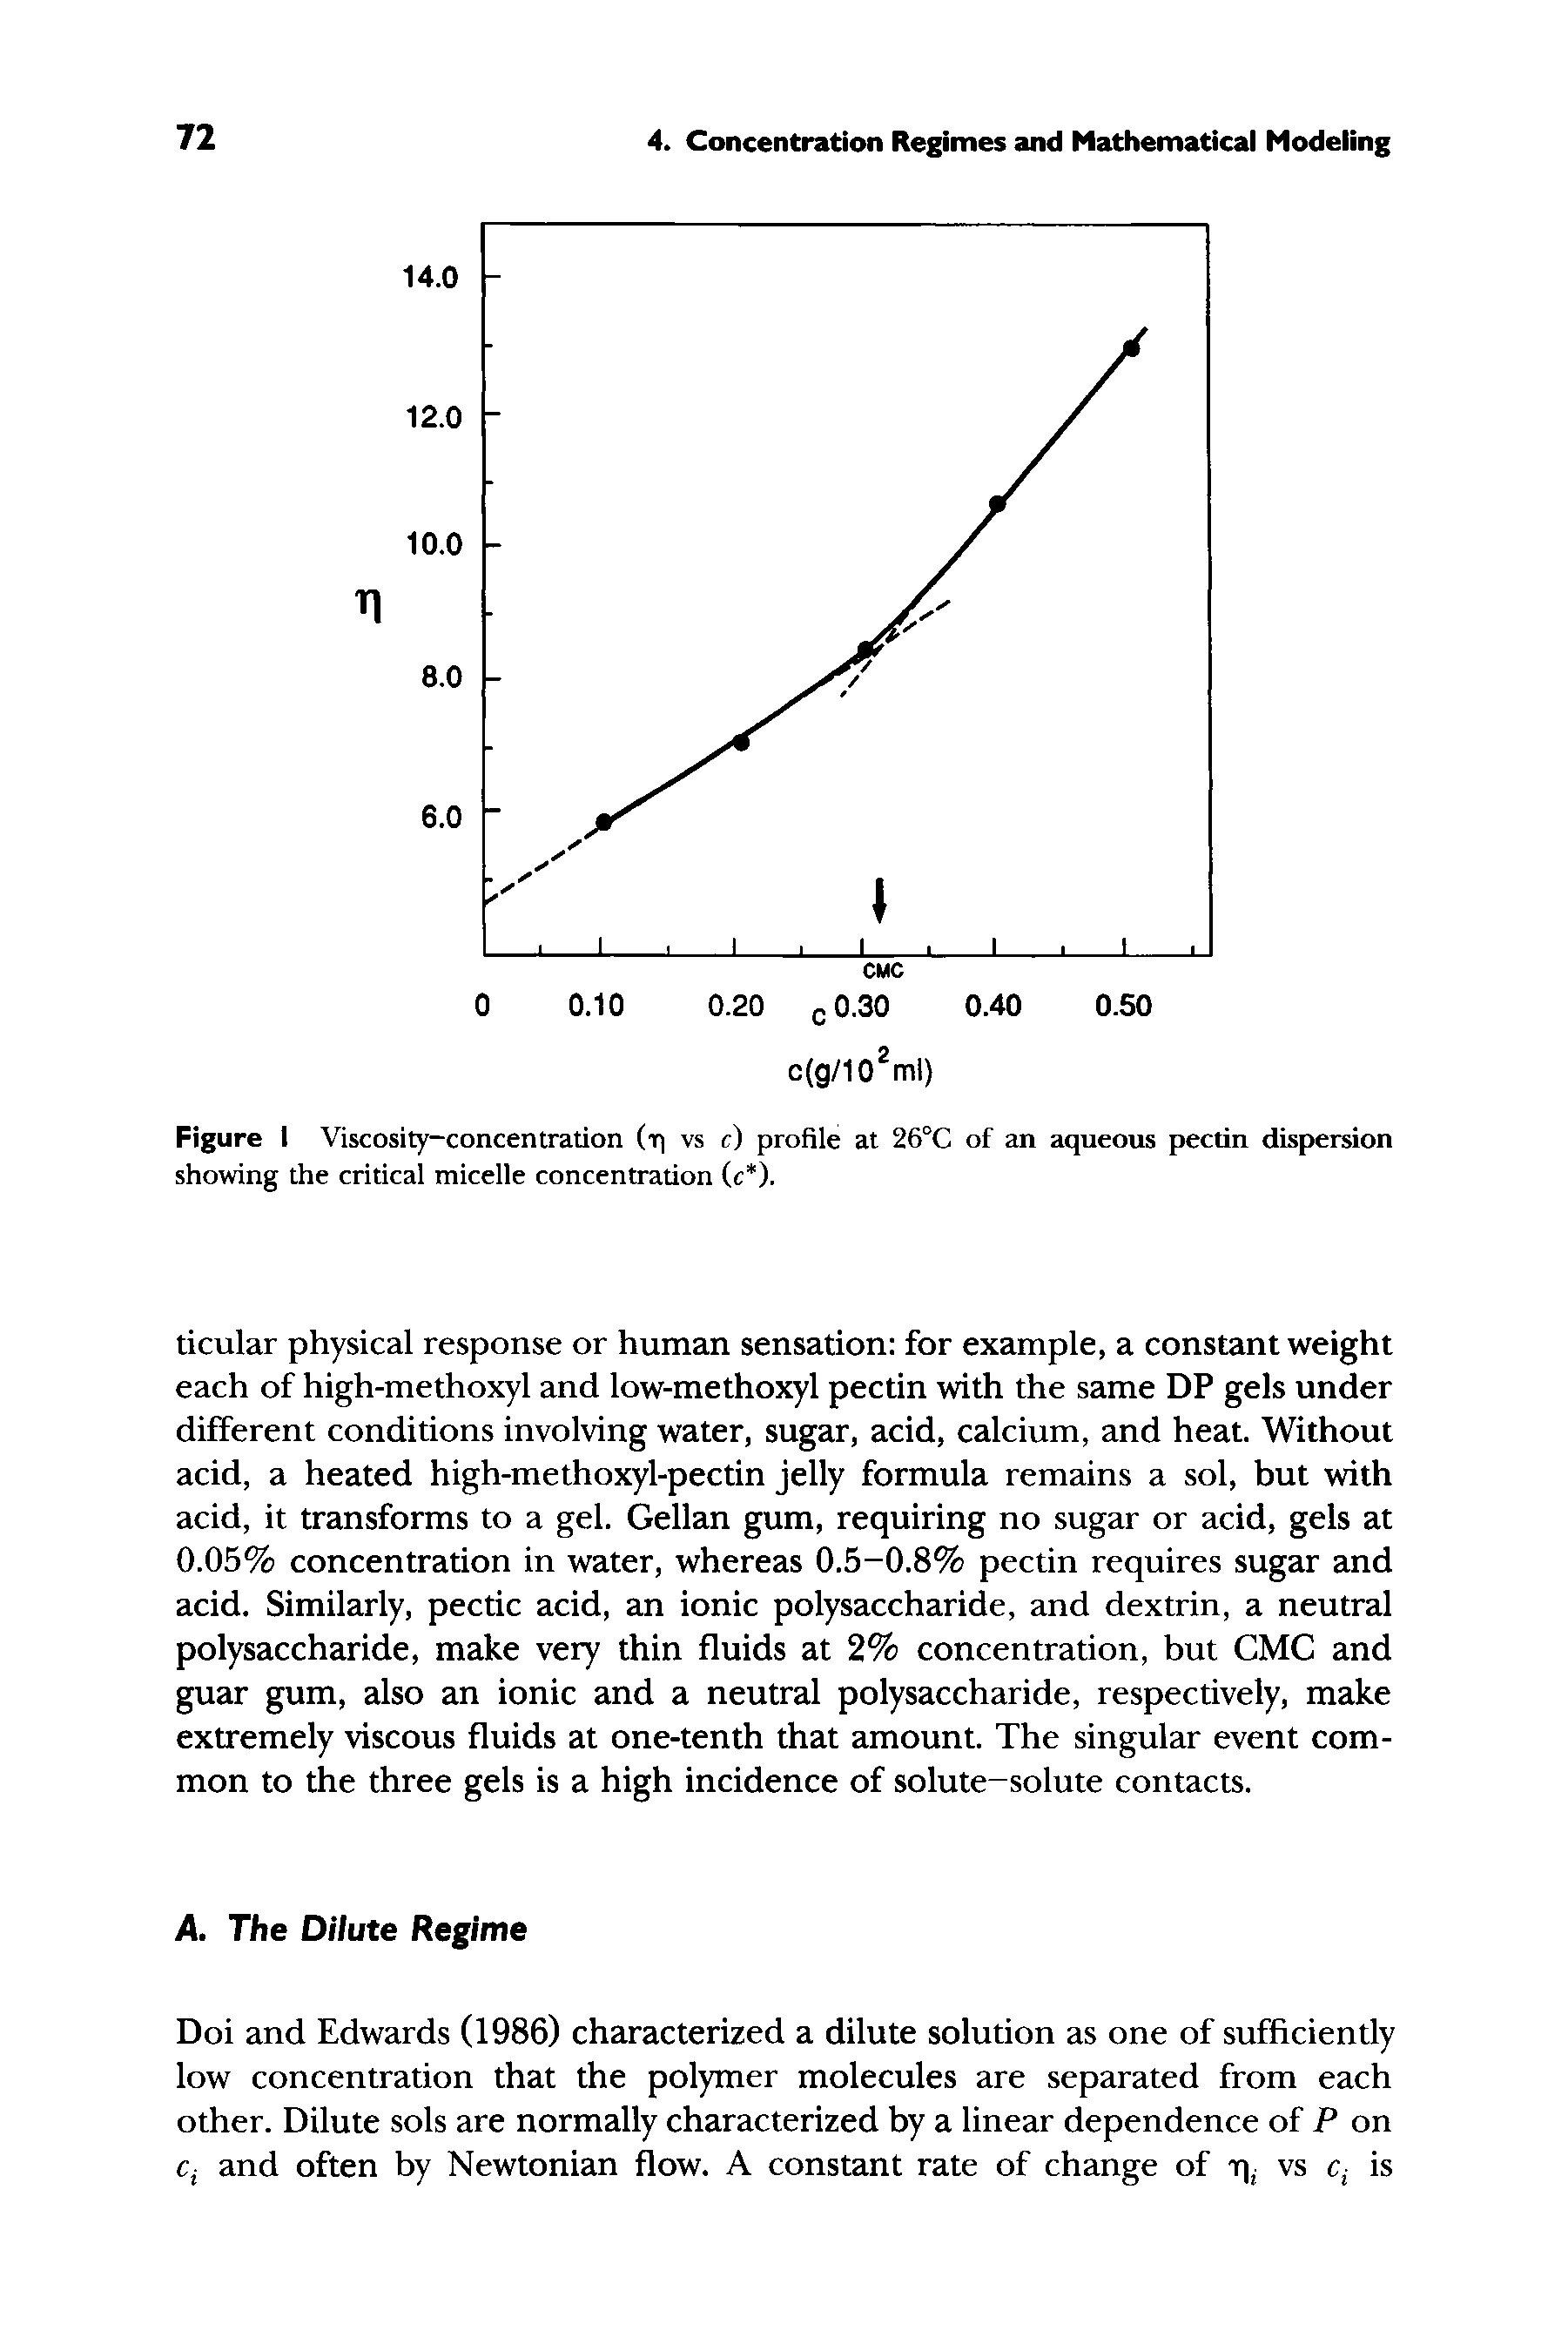 Figure I Viscosity-concentration (t vs c) profile at 26°C of an aqueous pectin dispersion showing the critical micelle concentration (c ).